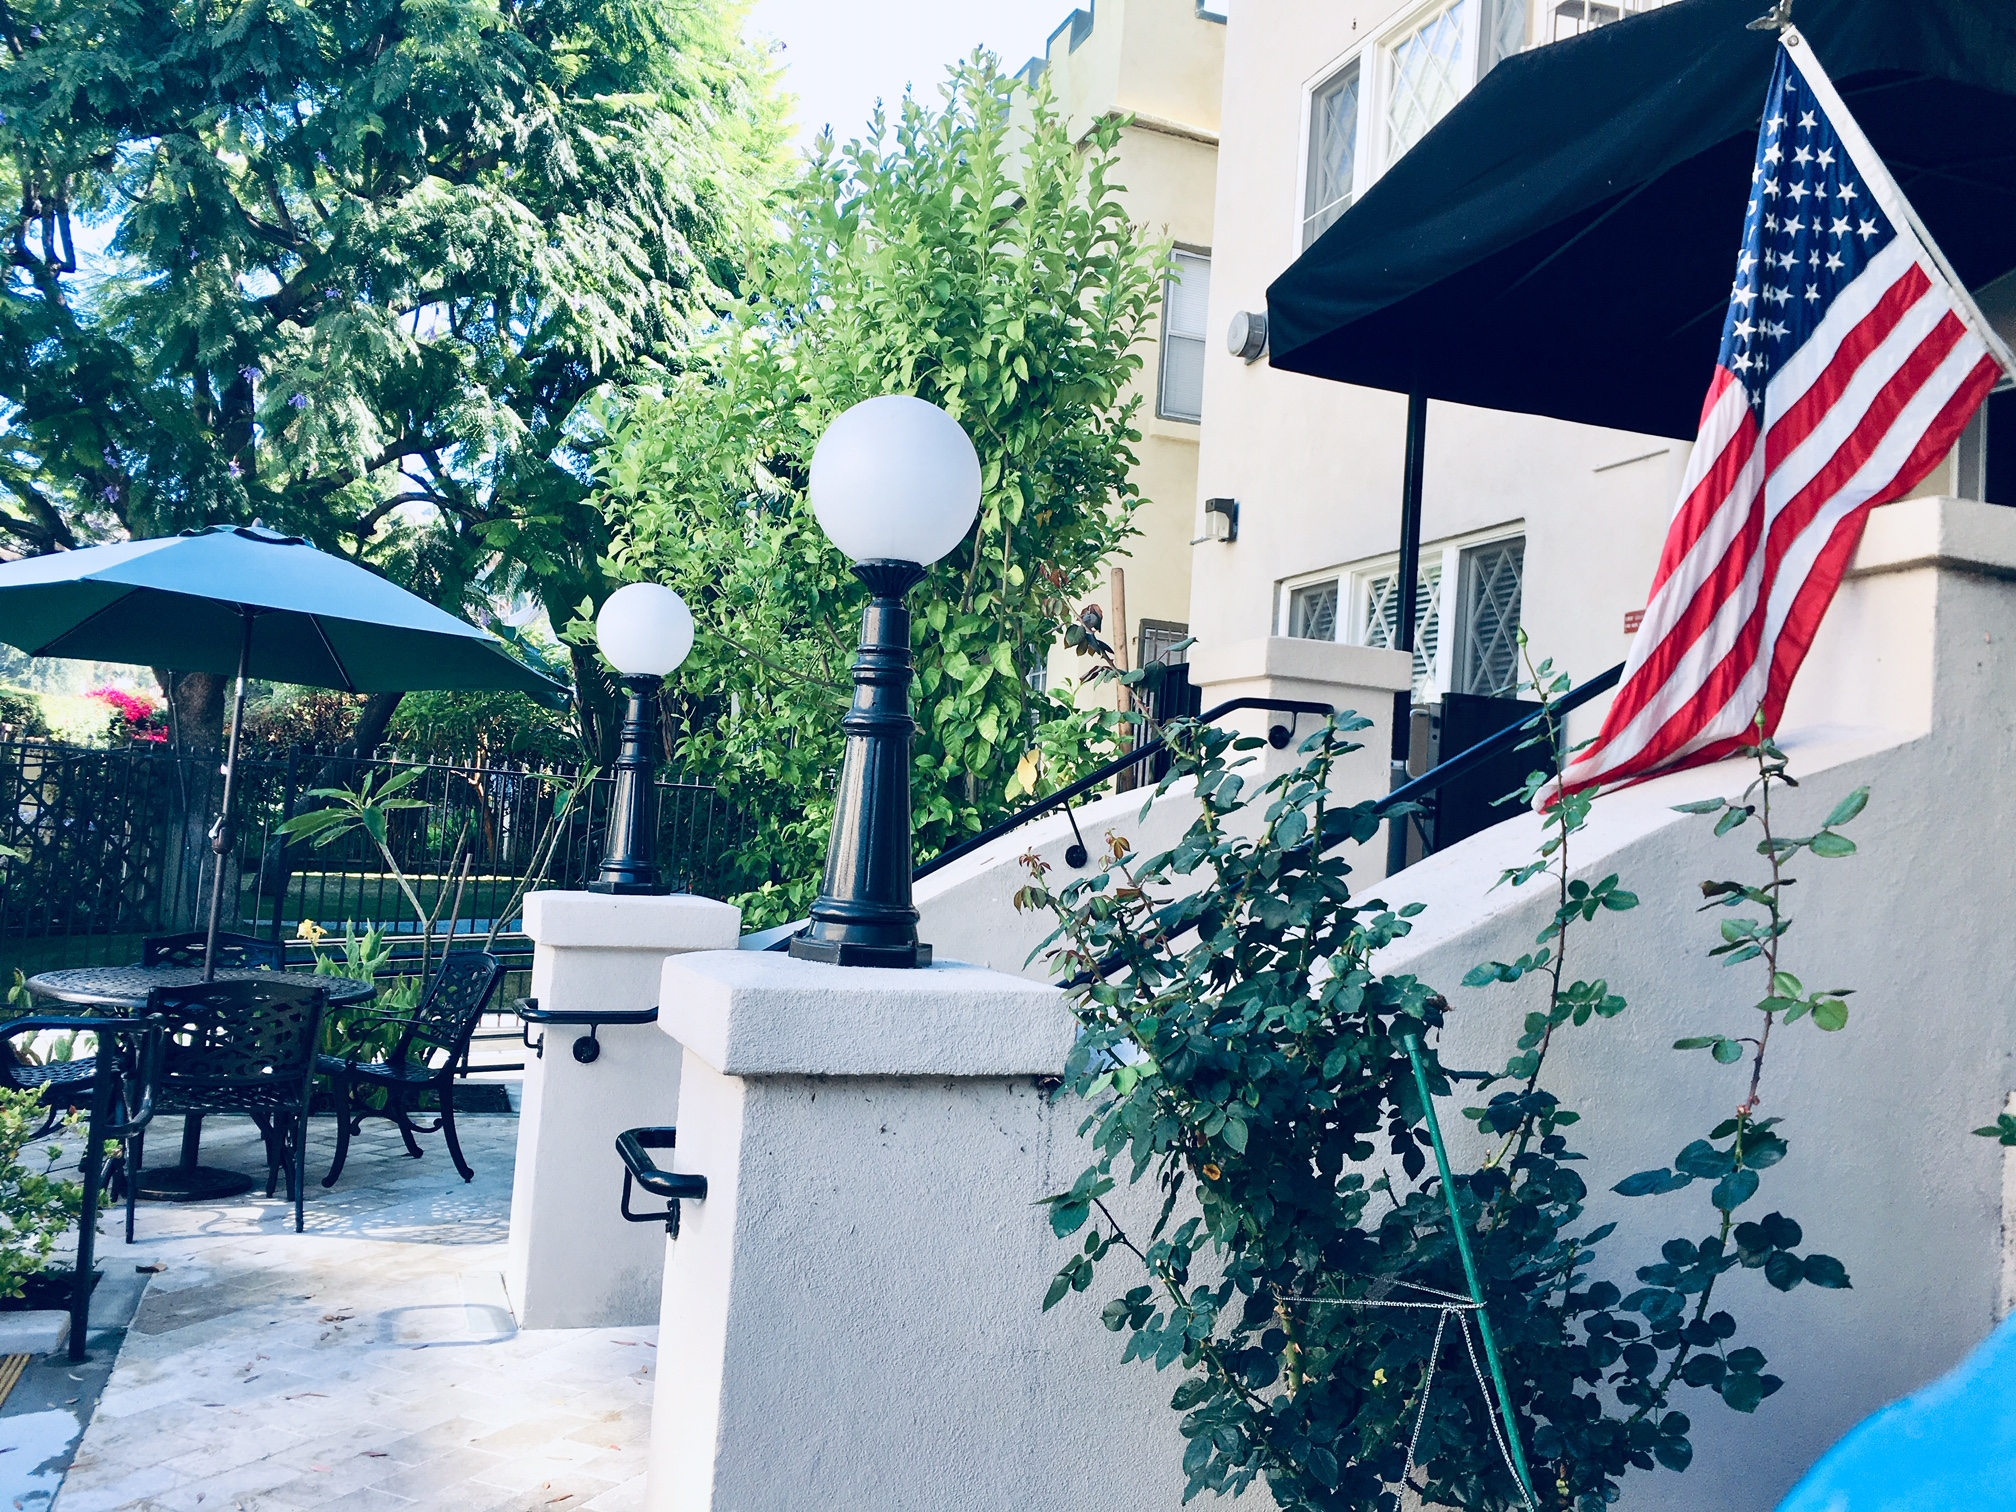 Side view of a patio area. There is a table with an umbrella and chairs. There is an area with newly planted trees. There is a small staircase with handle bars on both side, two lamps, and a small tent canopy with an United States flag on top.